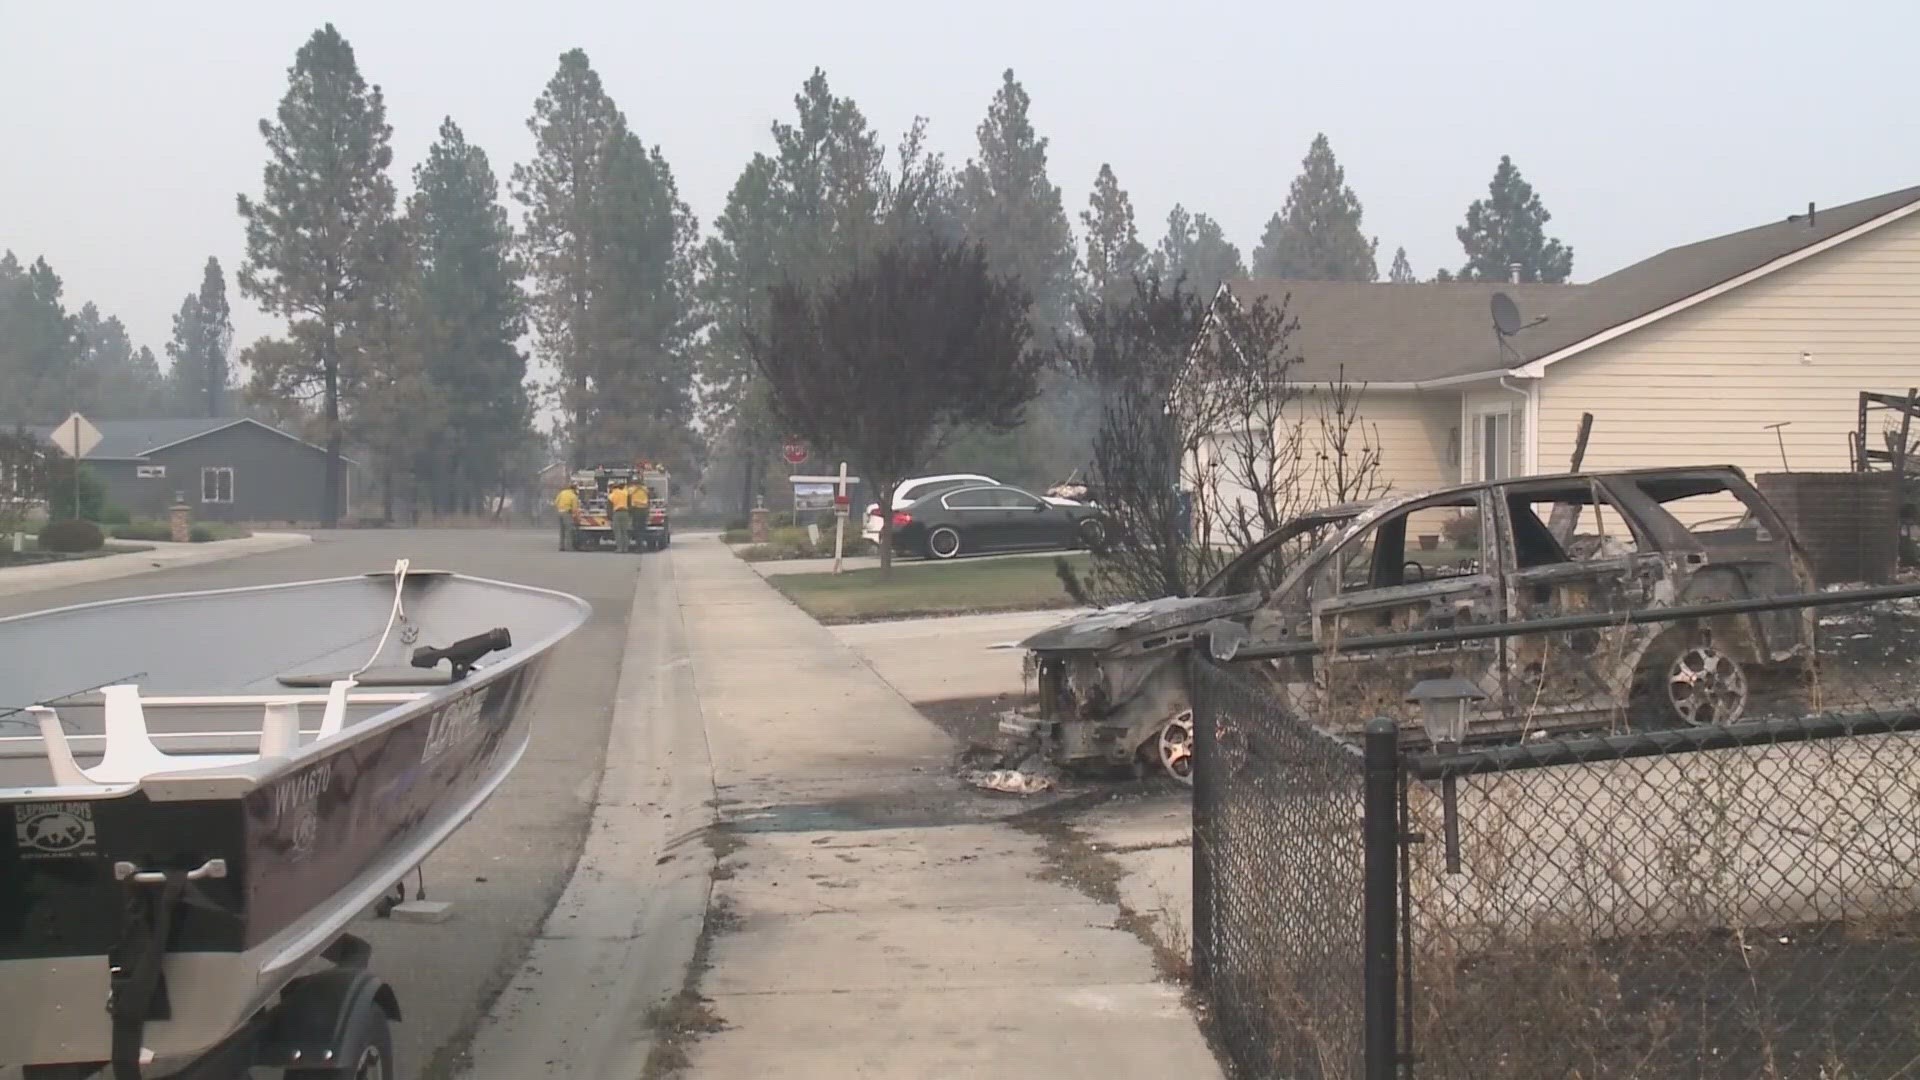 Families have been uprooted and major highways are impacted by ongoing wildfires in Spokane County.